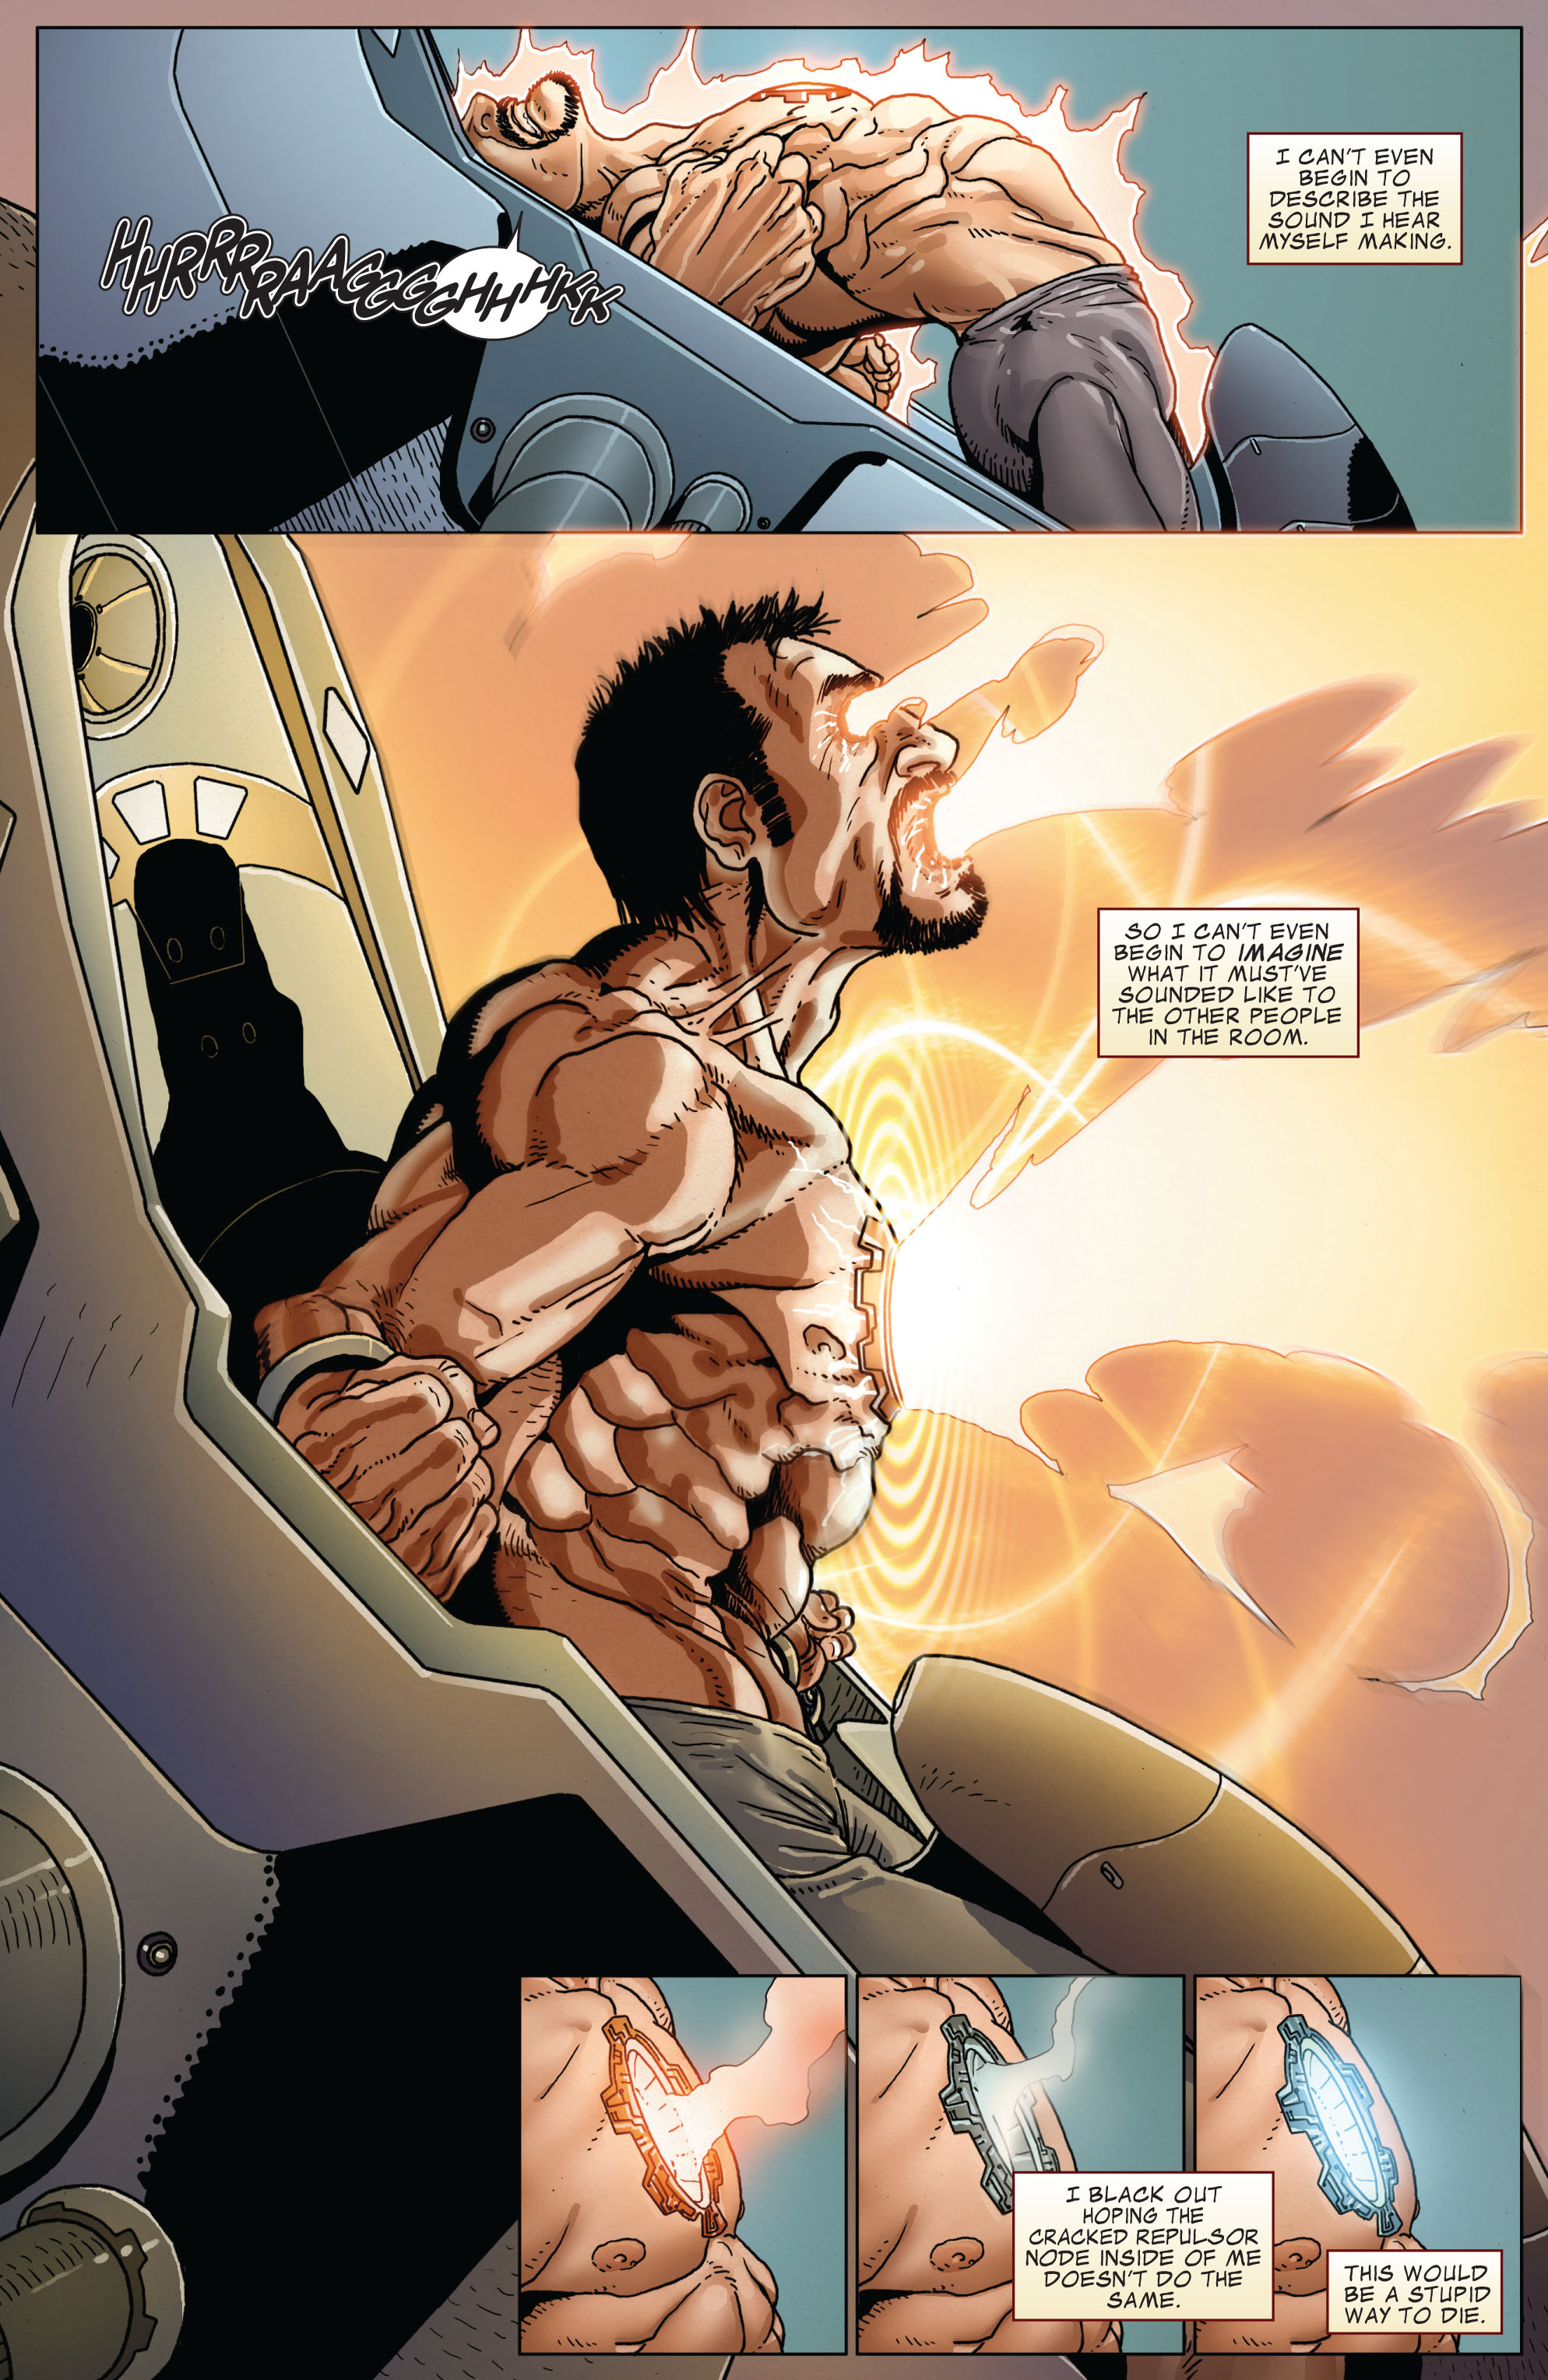 Invincible Iron Man (2008) 517 Page 7